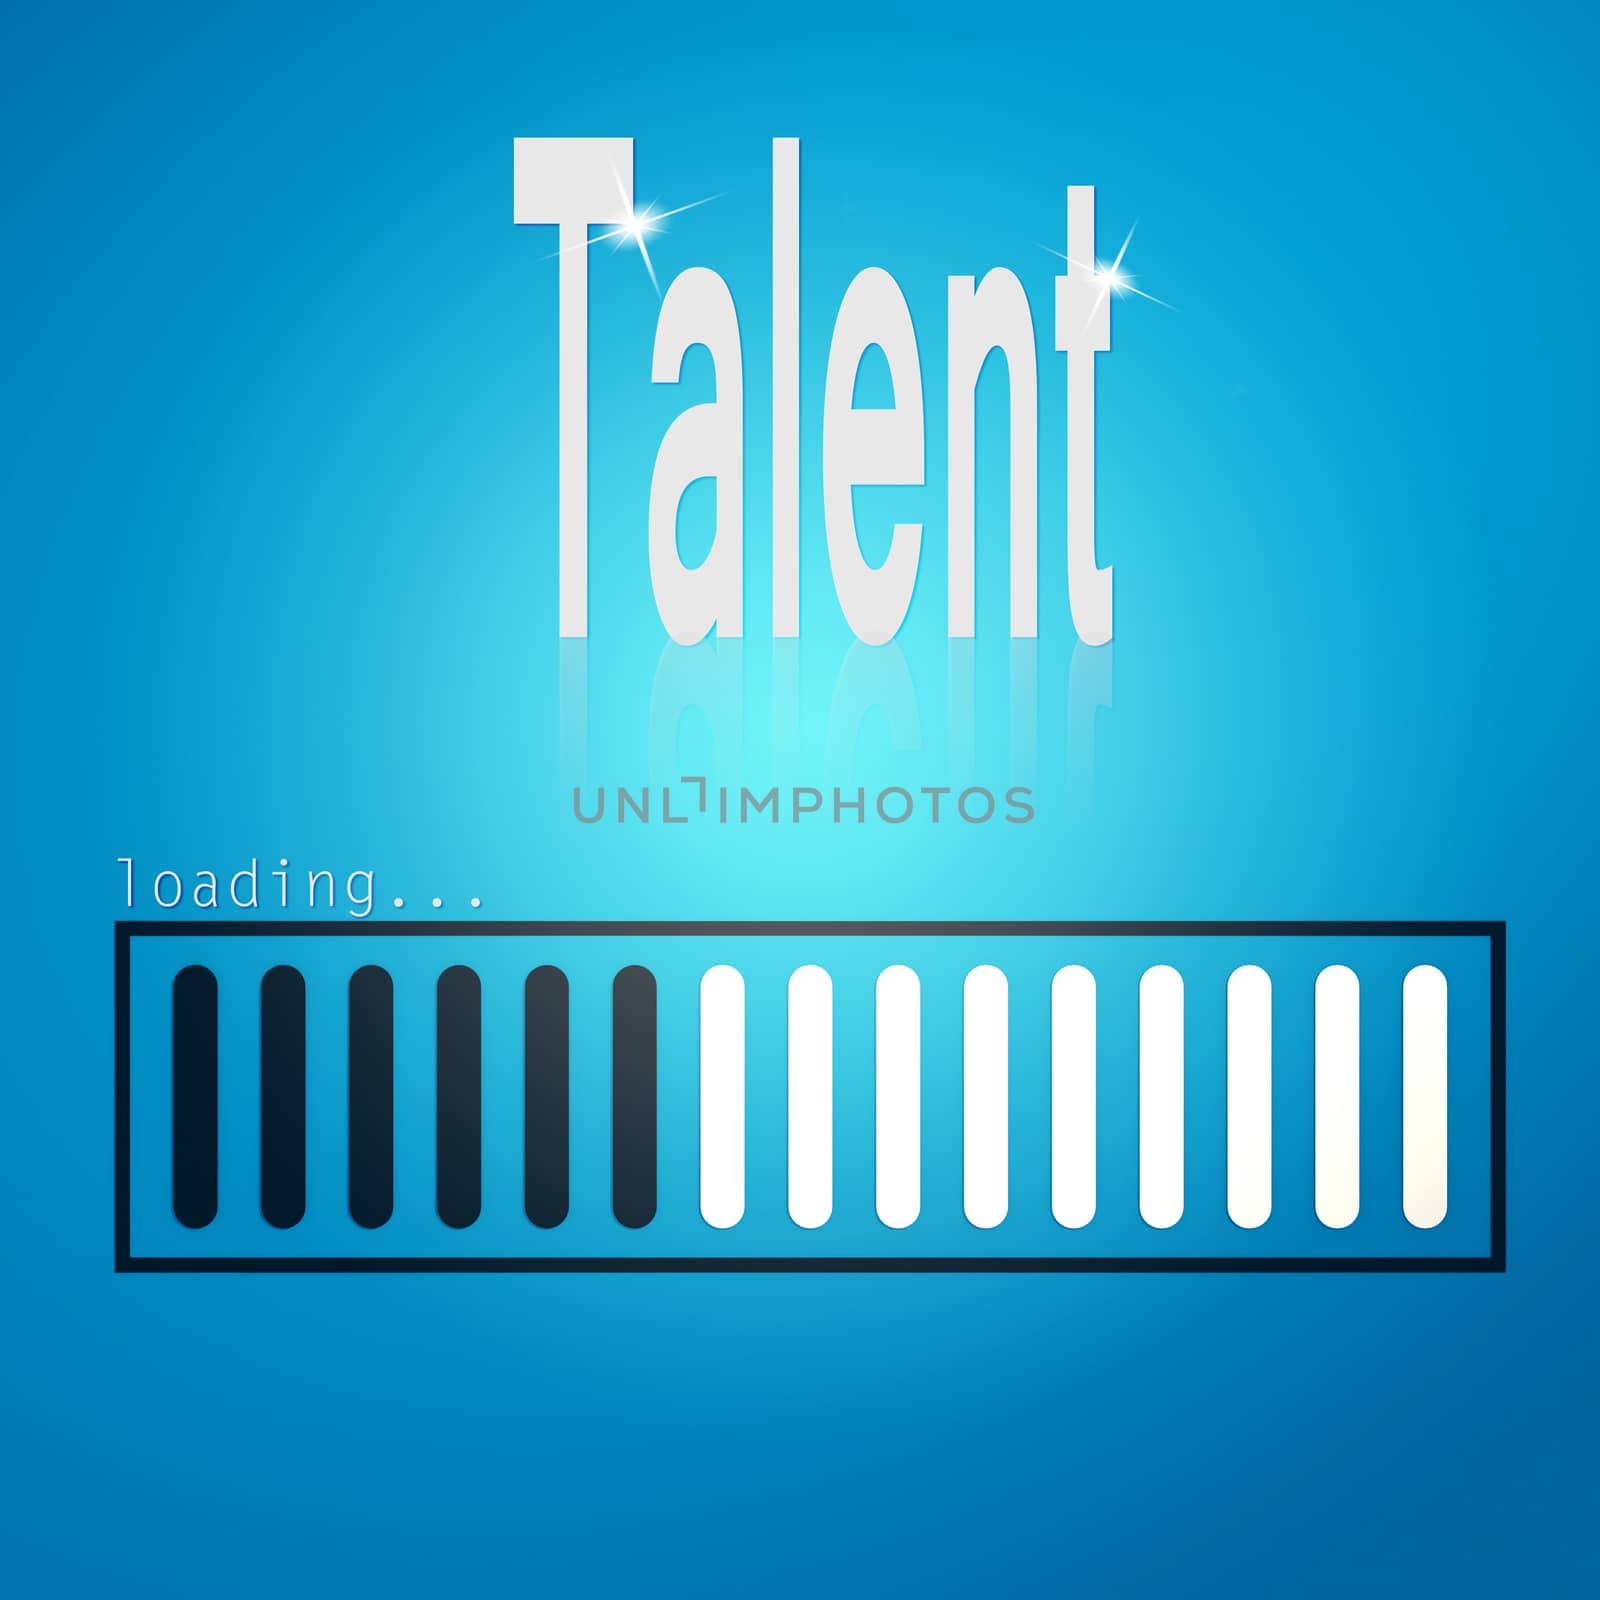 Progress Bar Loading with the text talent image with hi-res rendered artwork that could be used for any graphic design.